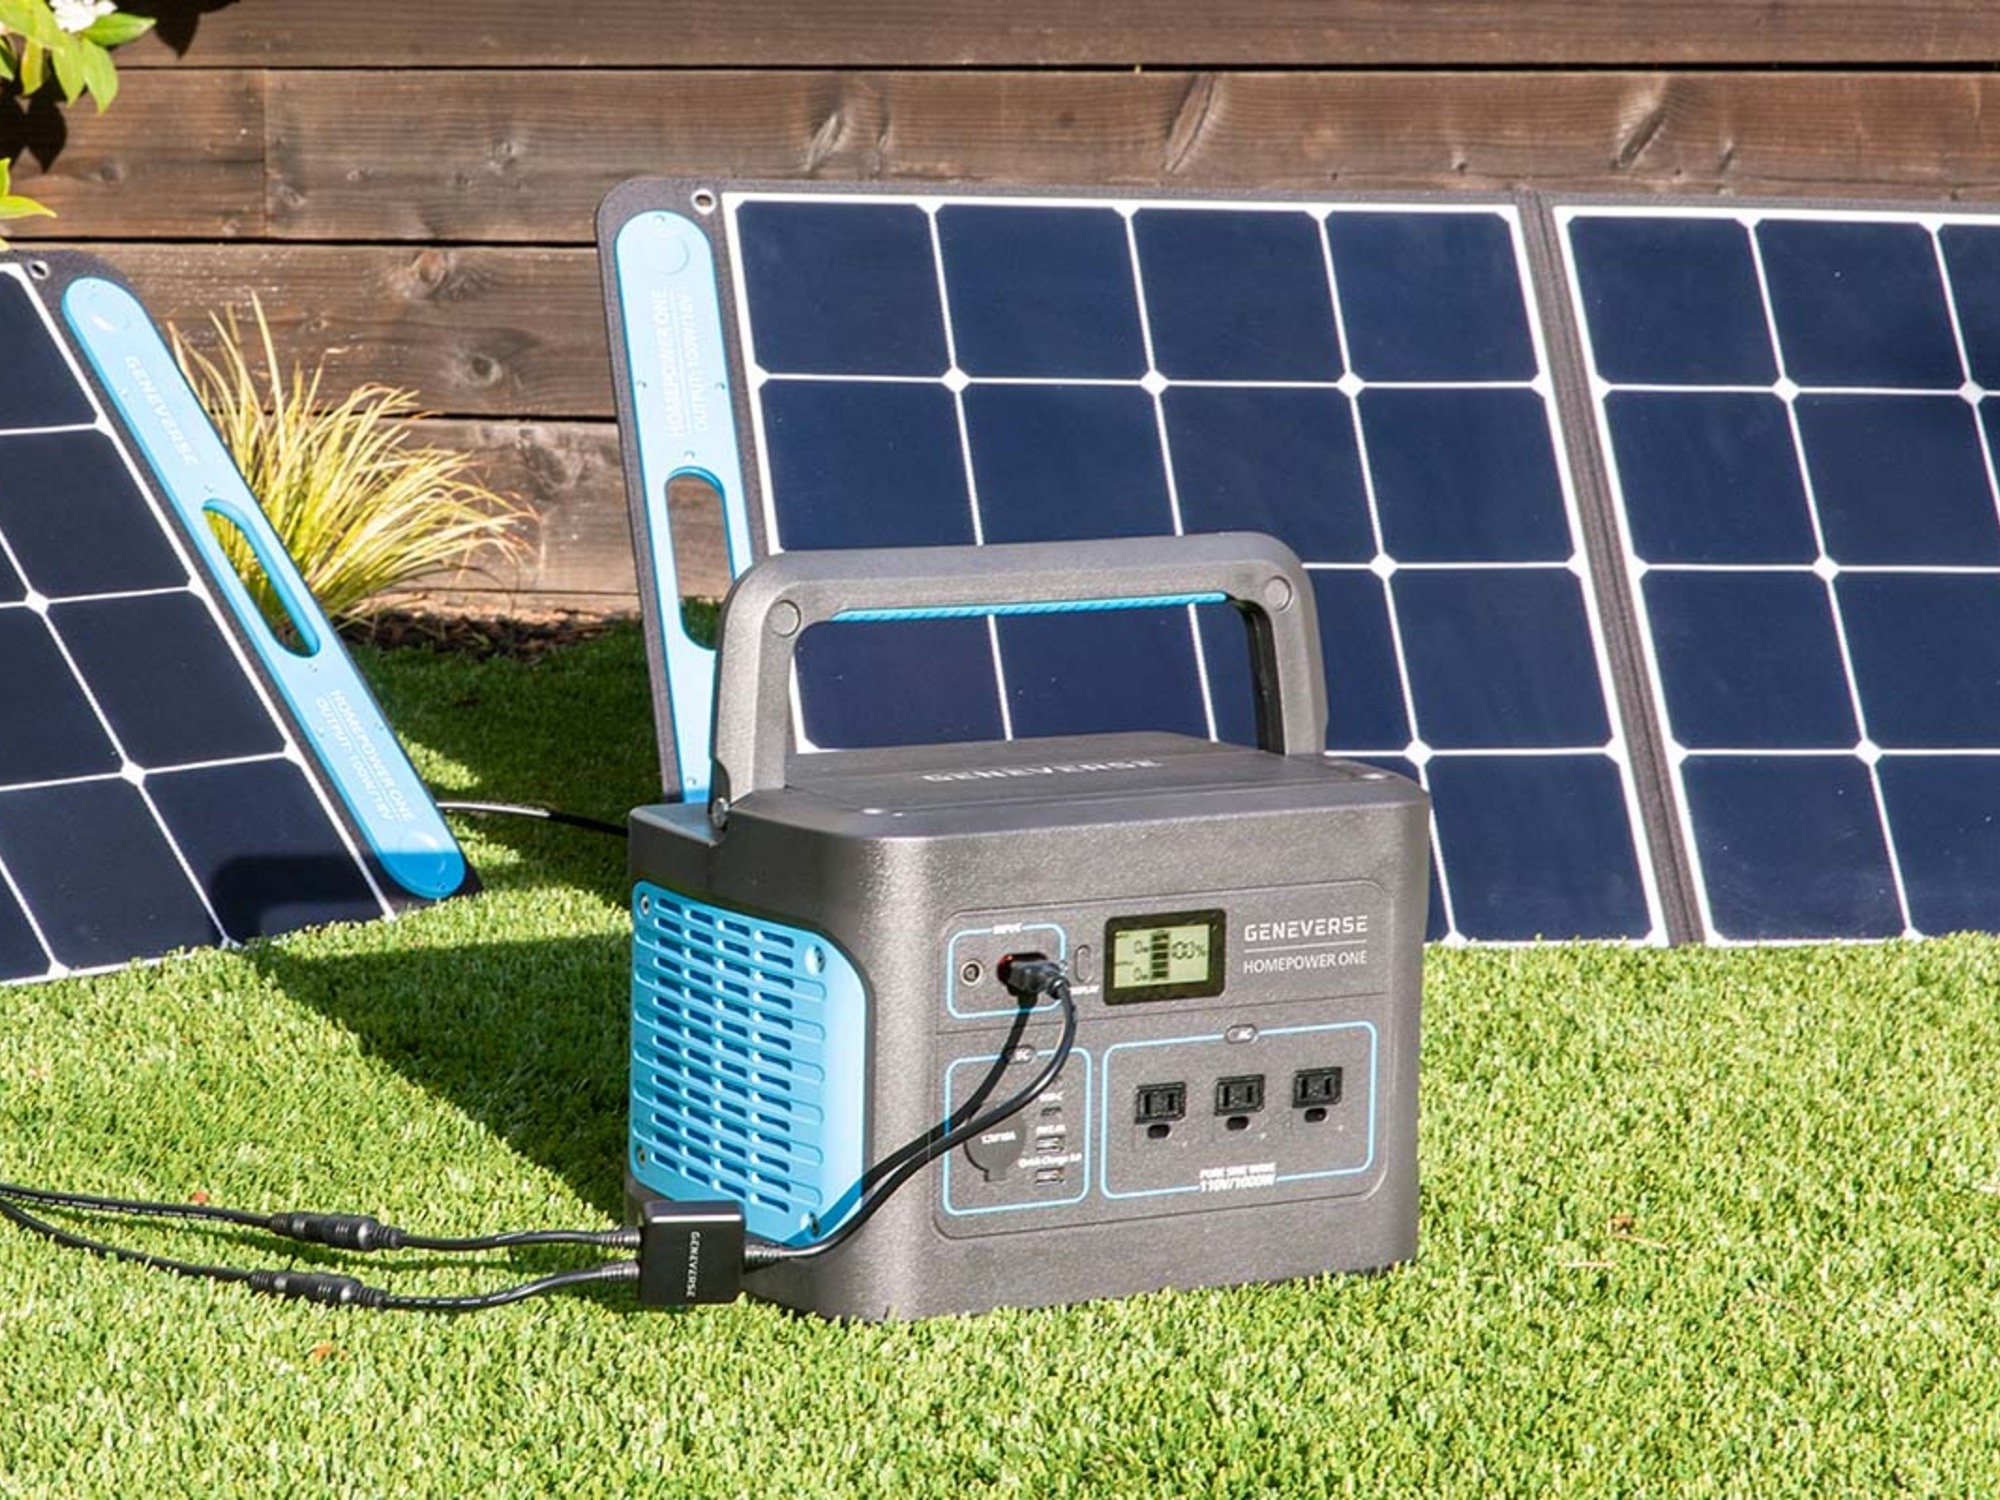 Avoid power loss at home with this versatile and long-lasting solar generator